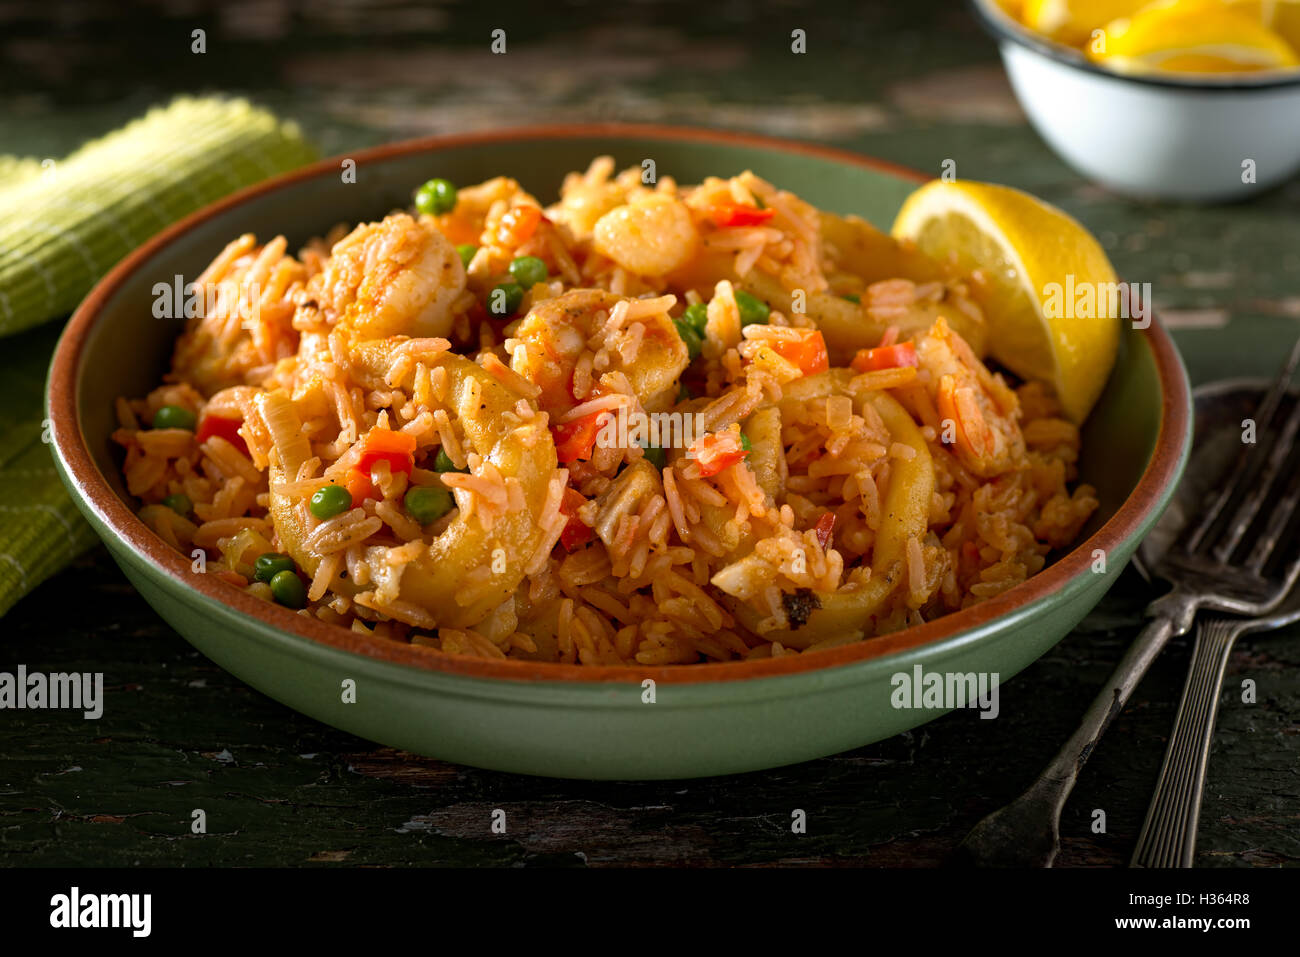 A bowl of delicious cuban Arroz con Mariscos - rice with seafood. Stock Photo